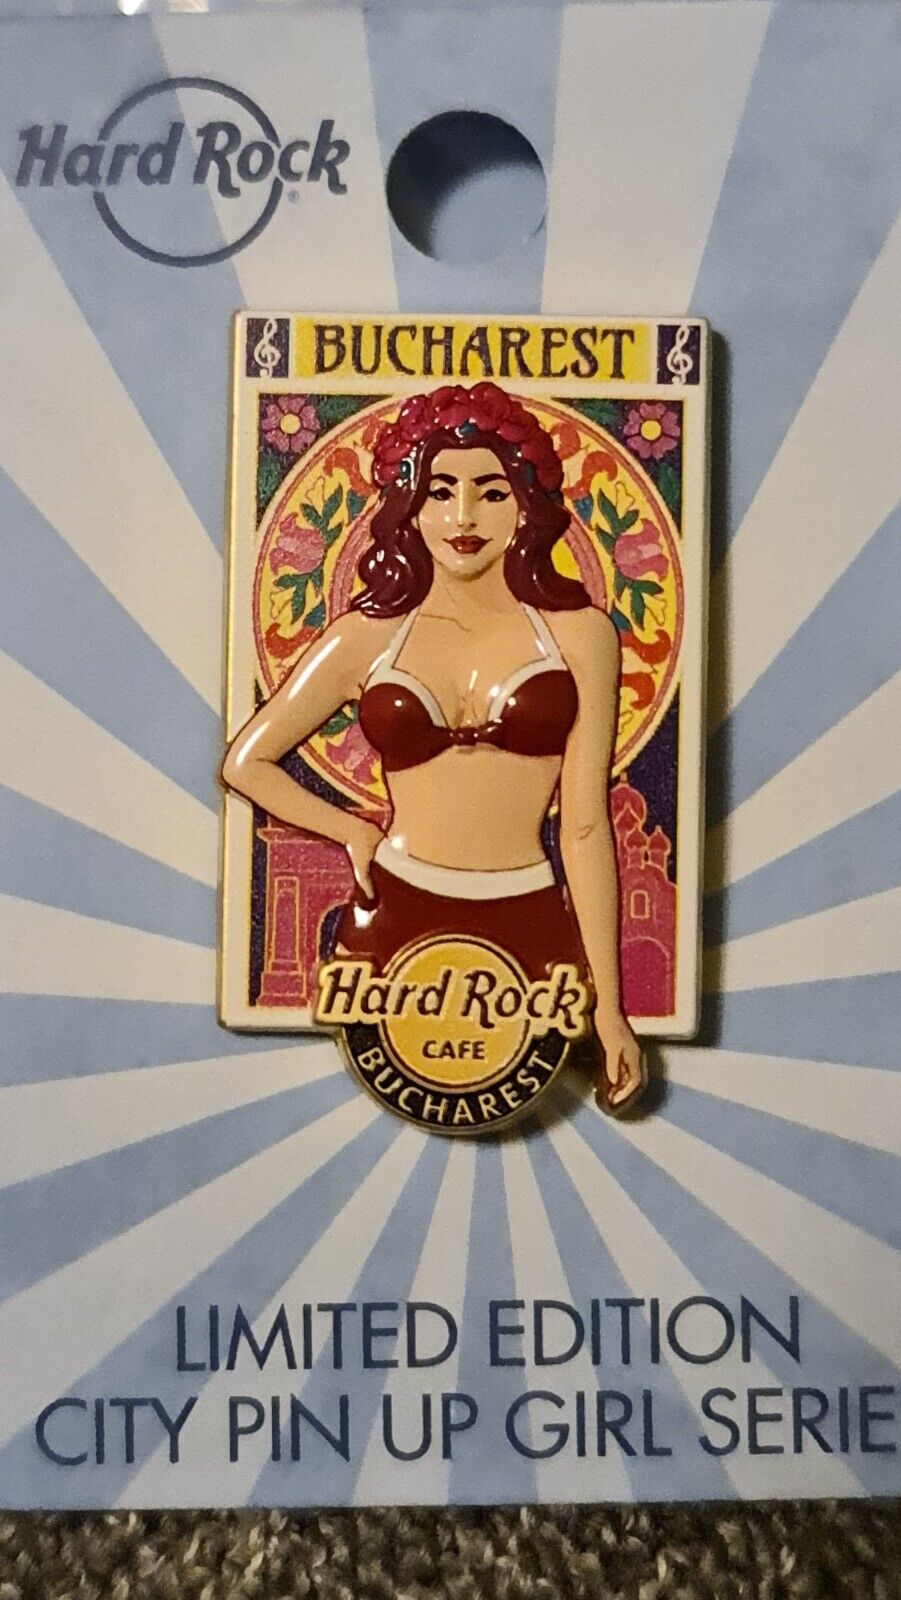 Hard Rock Cafe Bucharest City PIN Up Girl Series Limited to 300 - HRC #533911.  